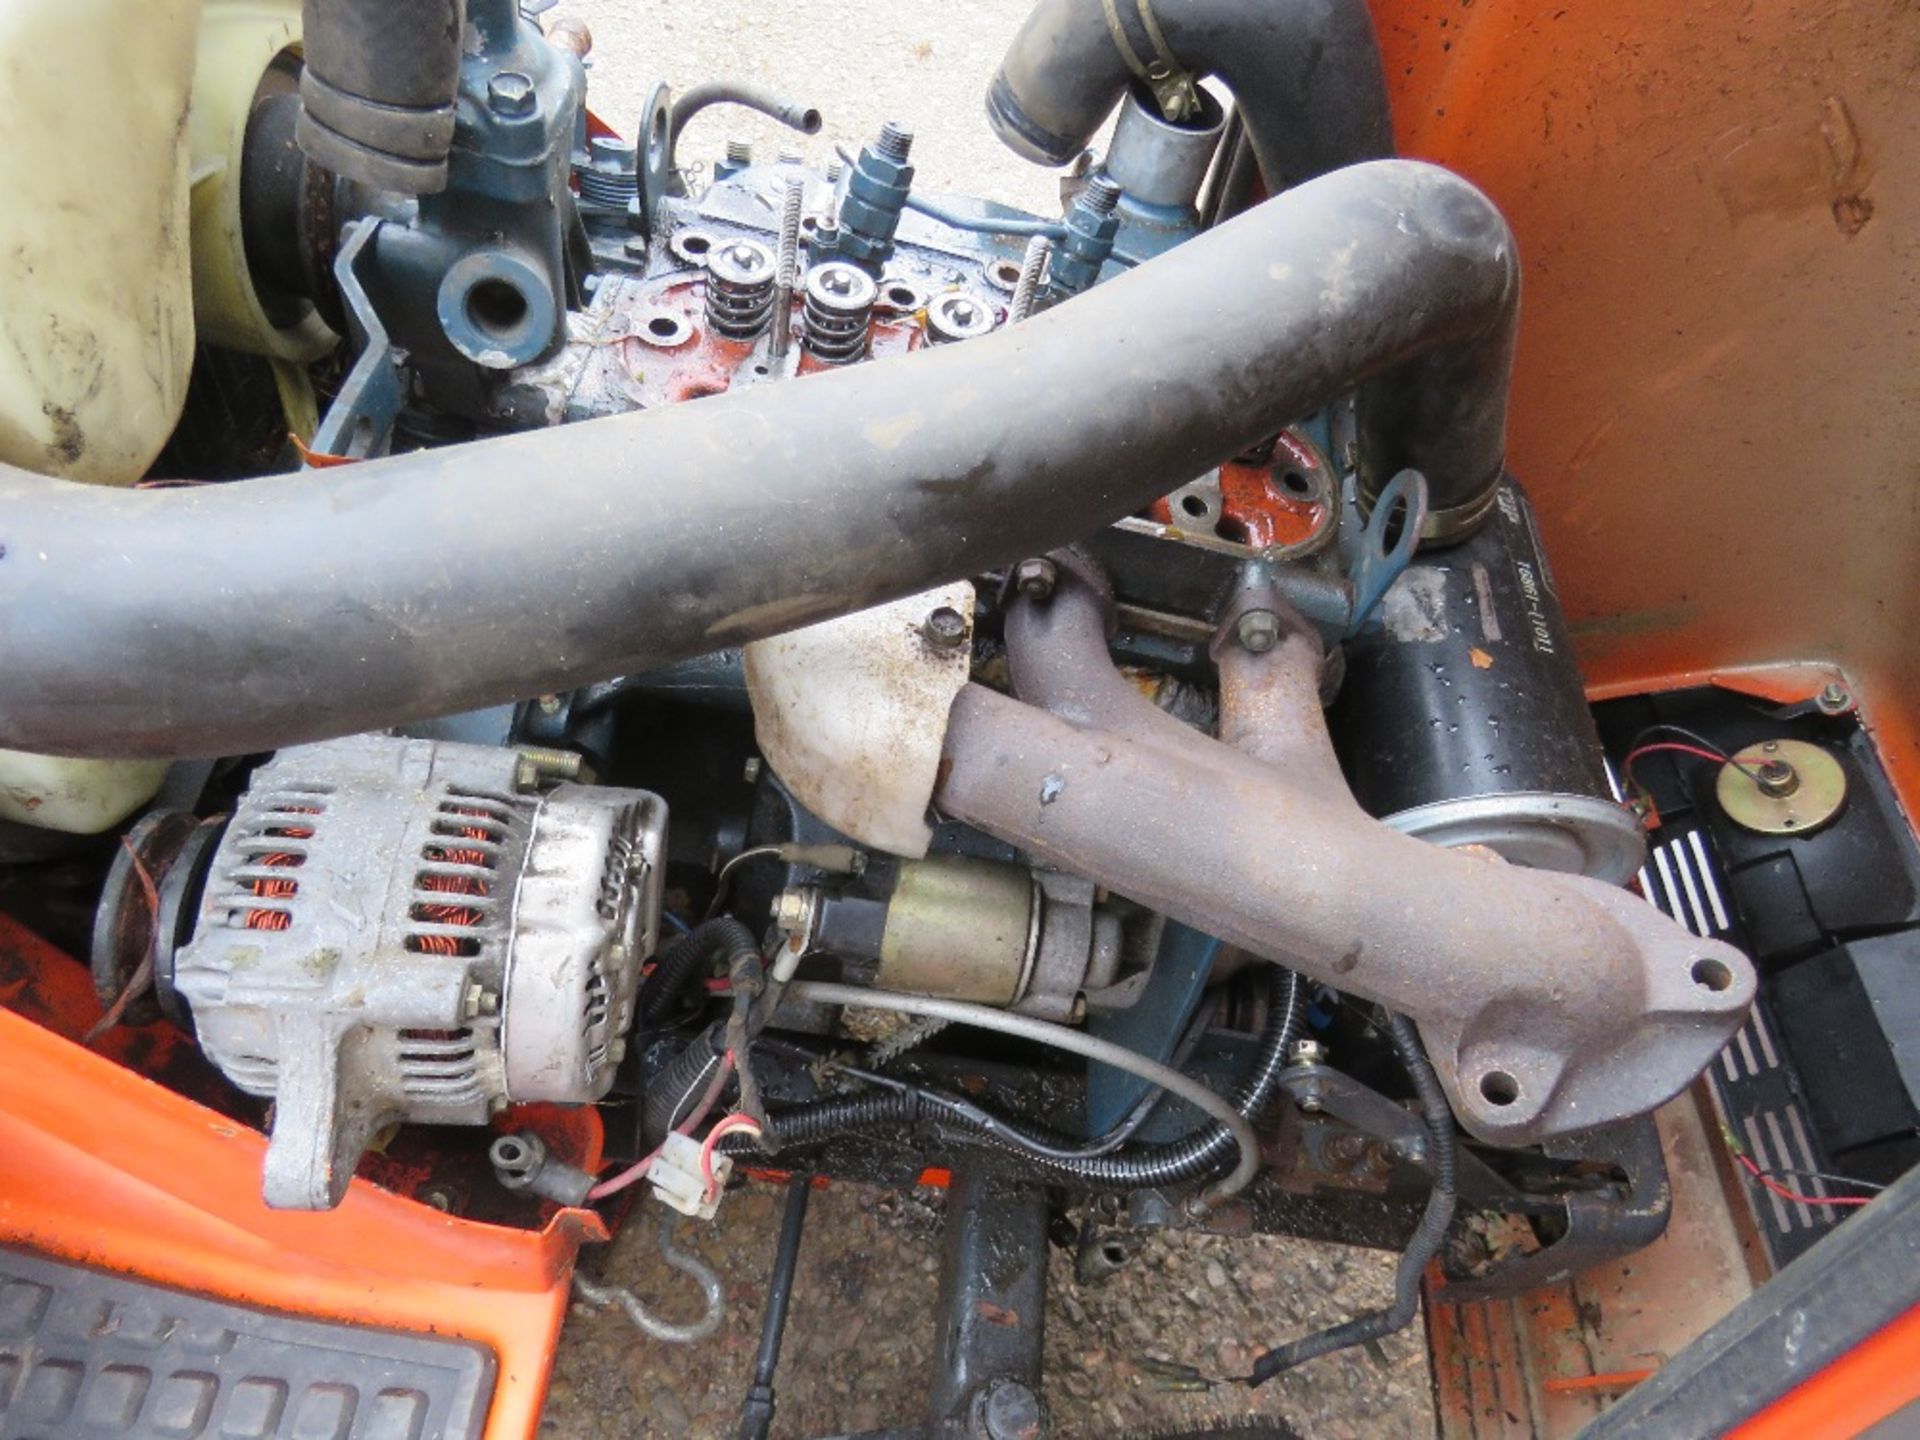 KUBOTA G1700 HST DIESEL RIDE ON MOWER. ENGINE PARTLY STRIPPED, AS SHOWN, SOLD AS UNTESTED/SPARES/REP - Image 7 of 8